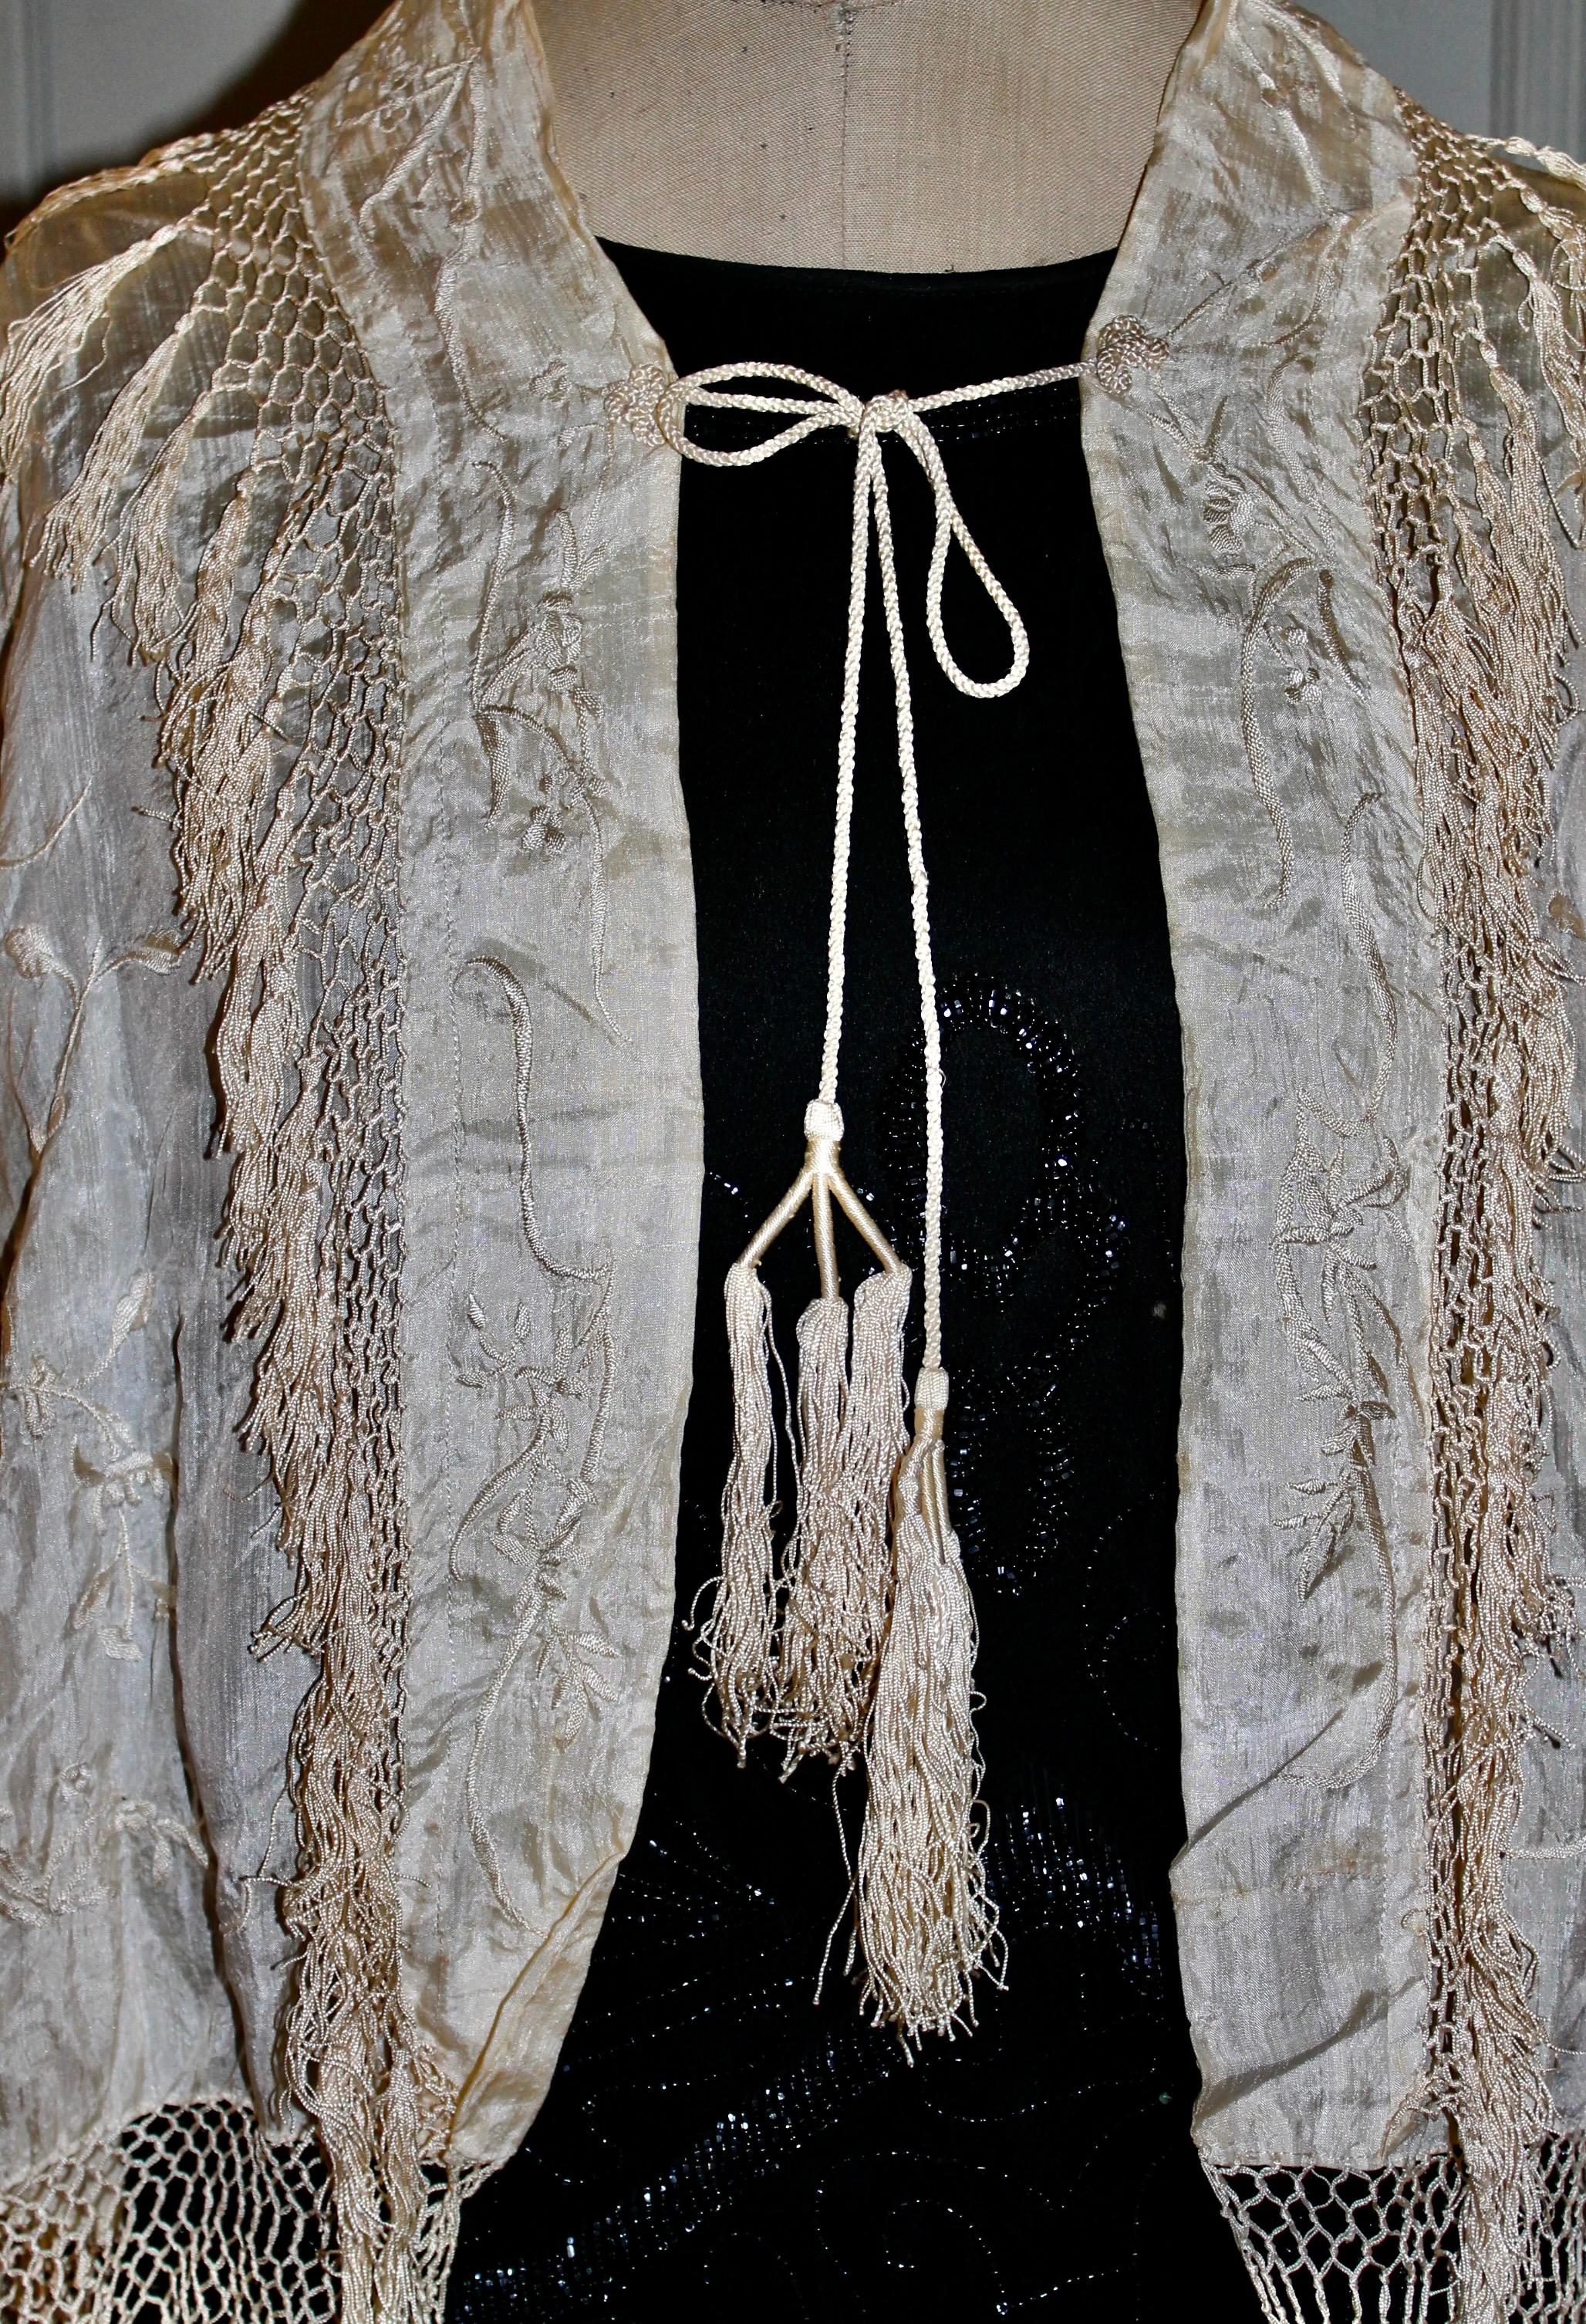 Cream silk.  Hand embroidered with a floral motif.  Hand knotted silk fringe.  Hanging braided tassels on back.  Tassels add 5